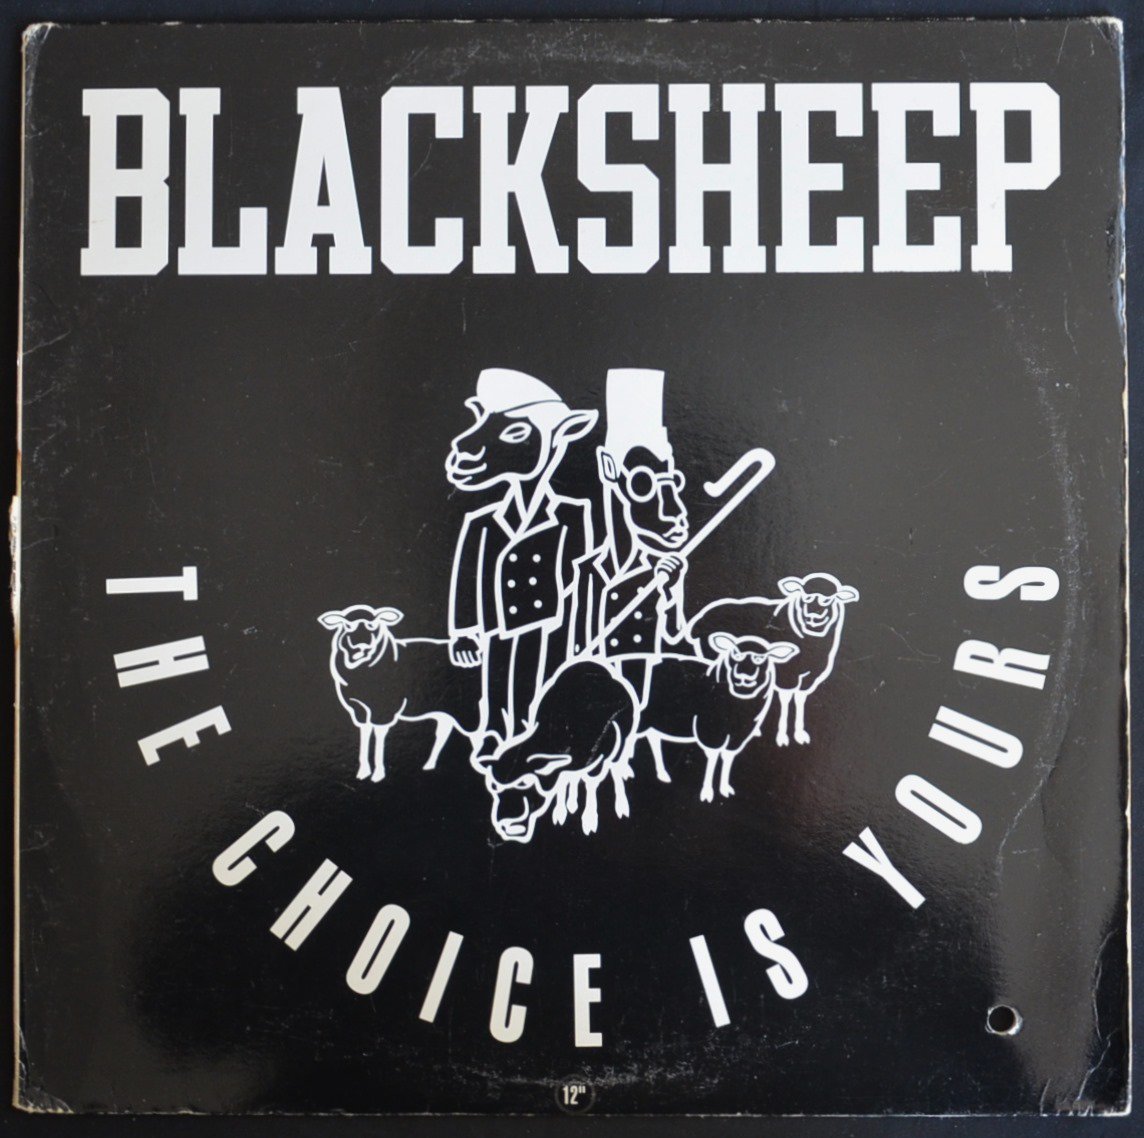 BLACKSHEEP / THE CHOICE IS YOURS / HAVE U.N.E. PULL (REMIX) / YES (12